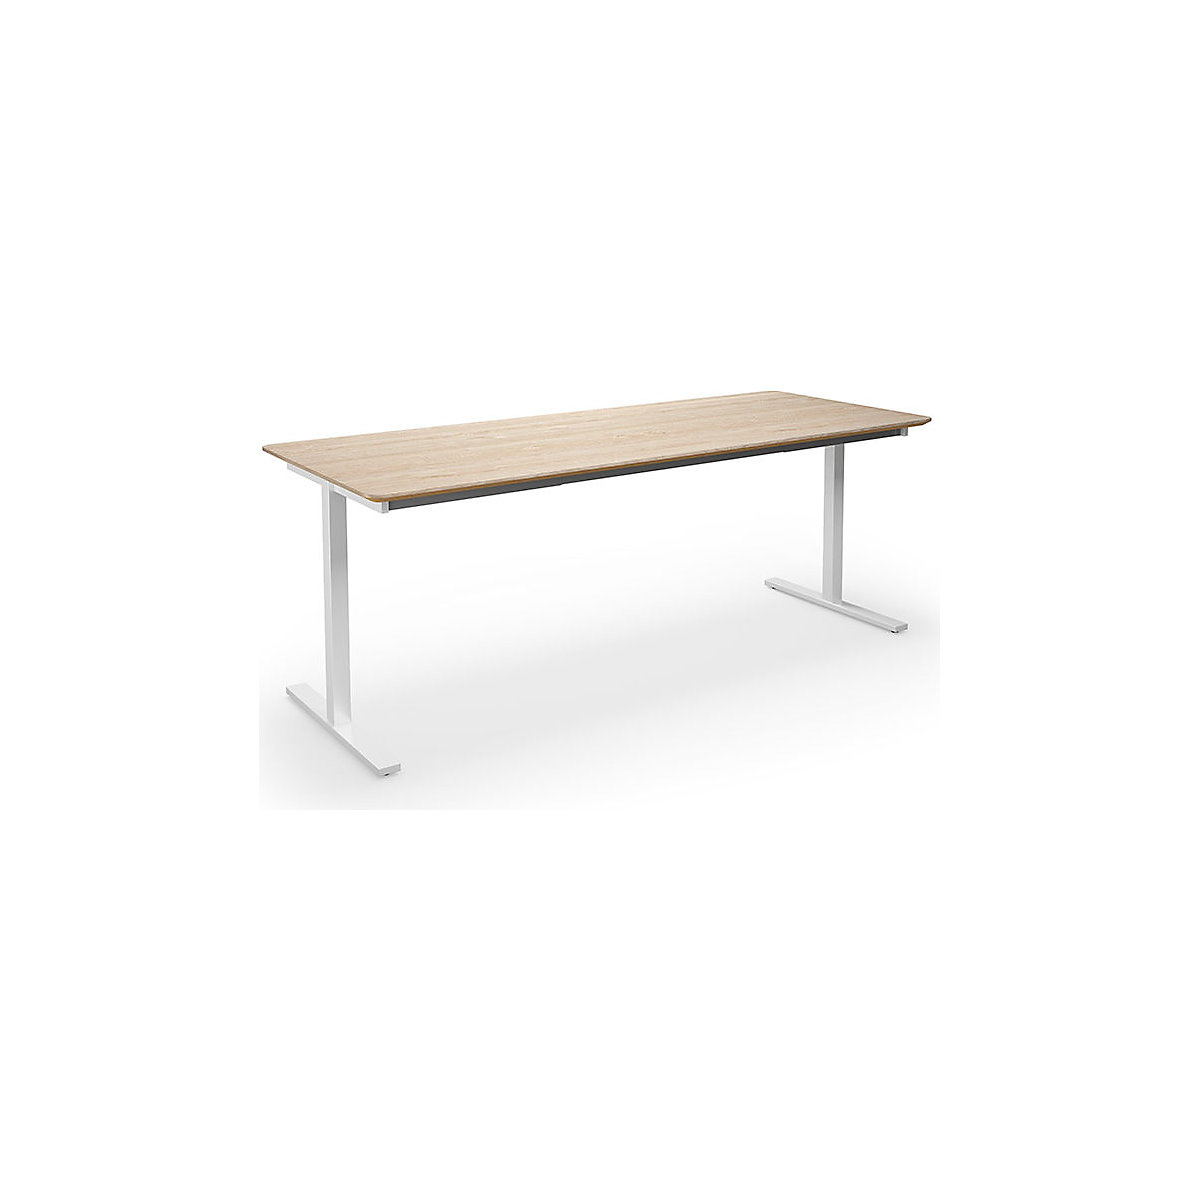 DUO-T Trend multi-purpose desk, straight tabletop, rounded corners, WxD 1800 x 800 mm, oak, white-5